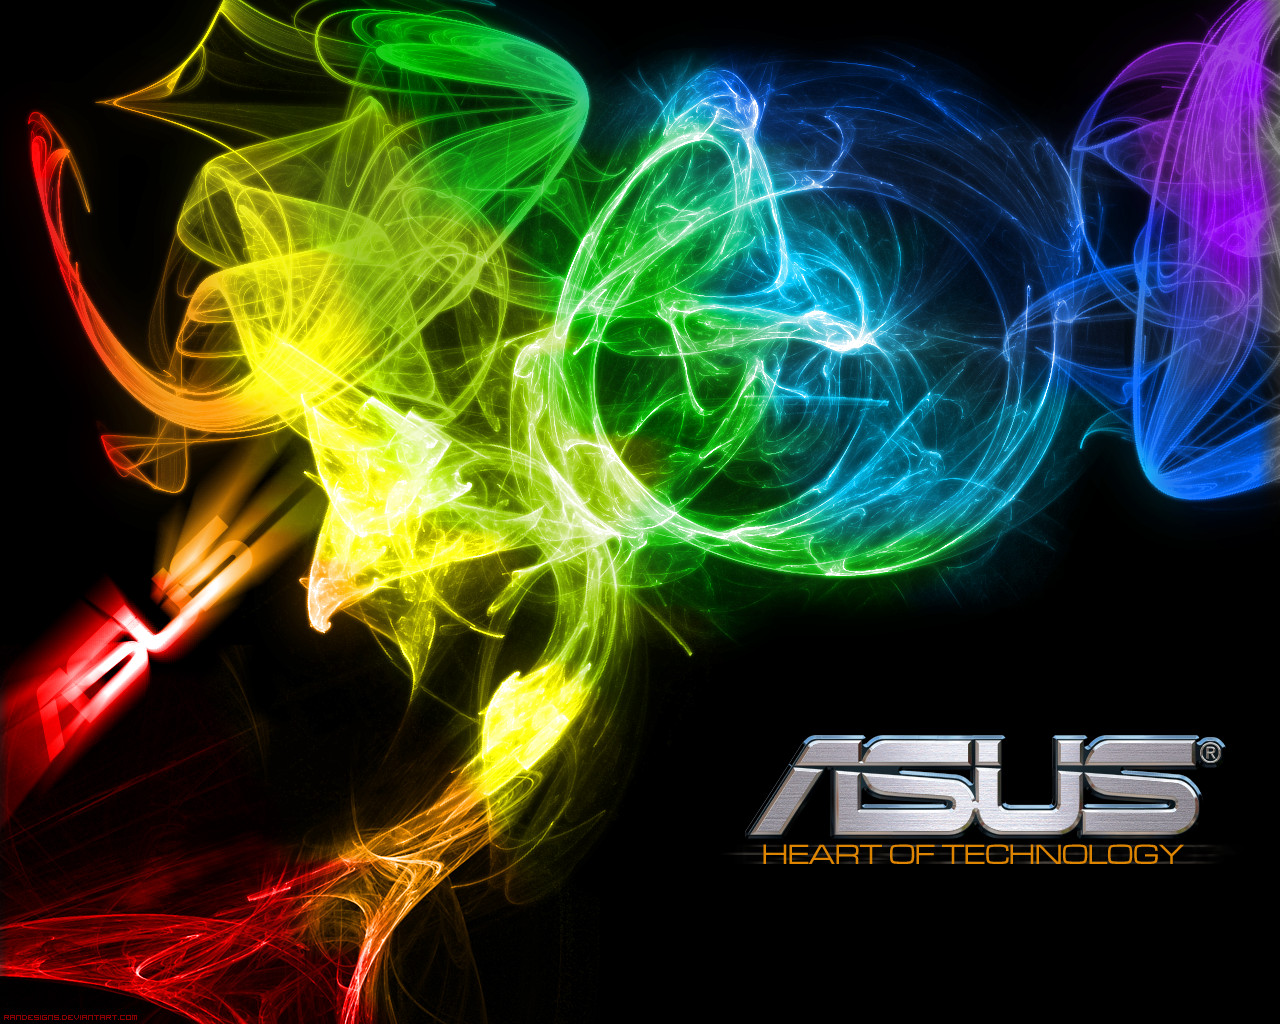 asus wallpaper 1280x1024 5 4 back to wallpaper back home